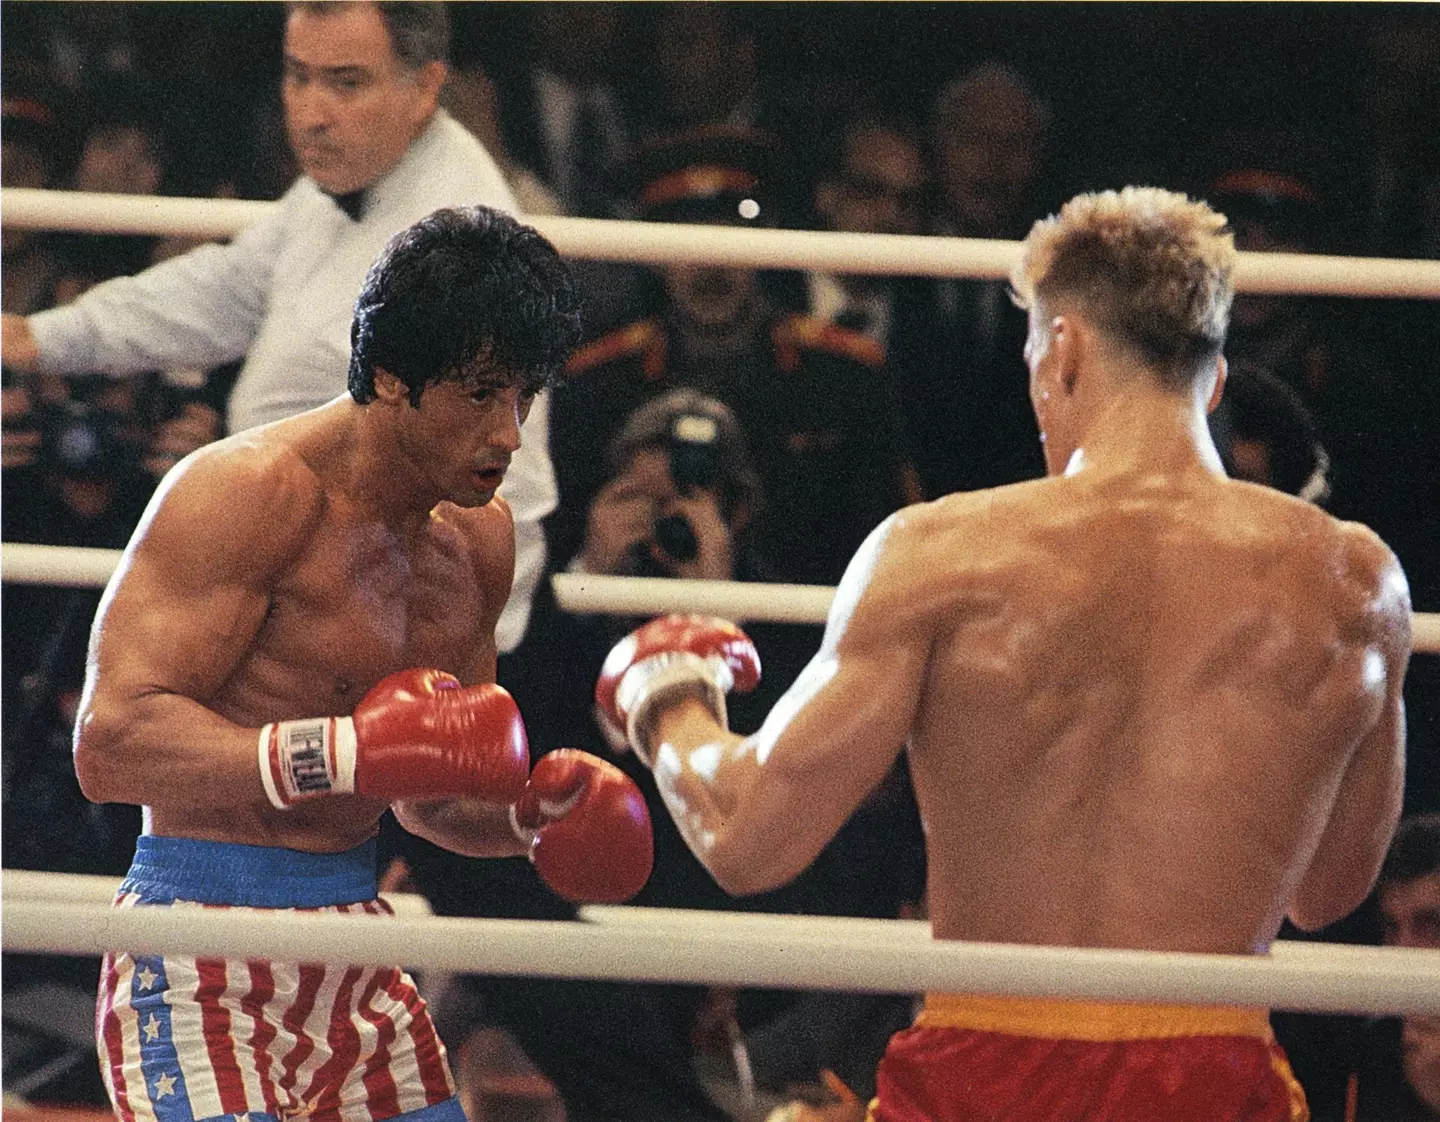 Stallone penned the first film and has starred in every Rocky film until now.